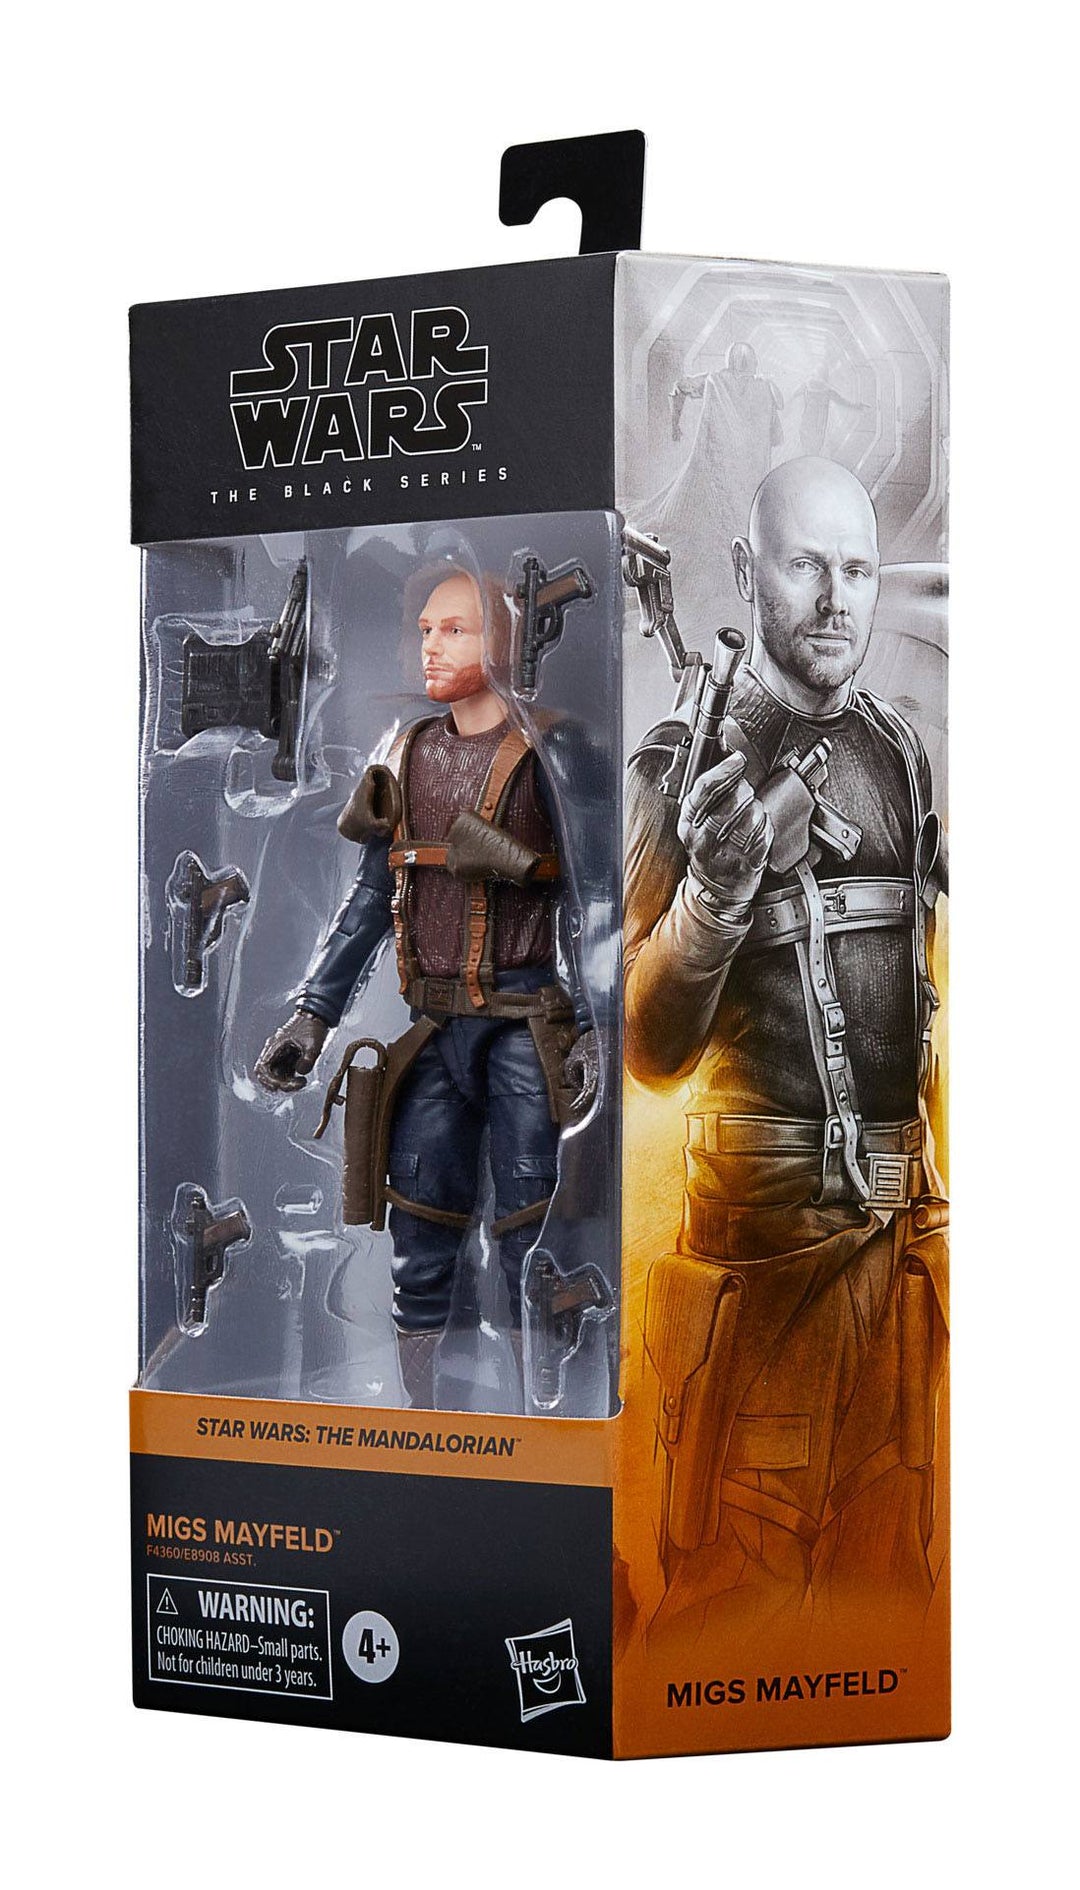 Star Wars The Black Series Migs Mayfeld (The Mandalorian) 6" Action Figure